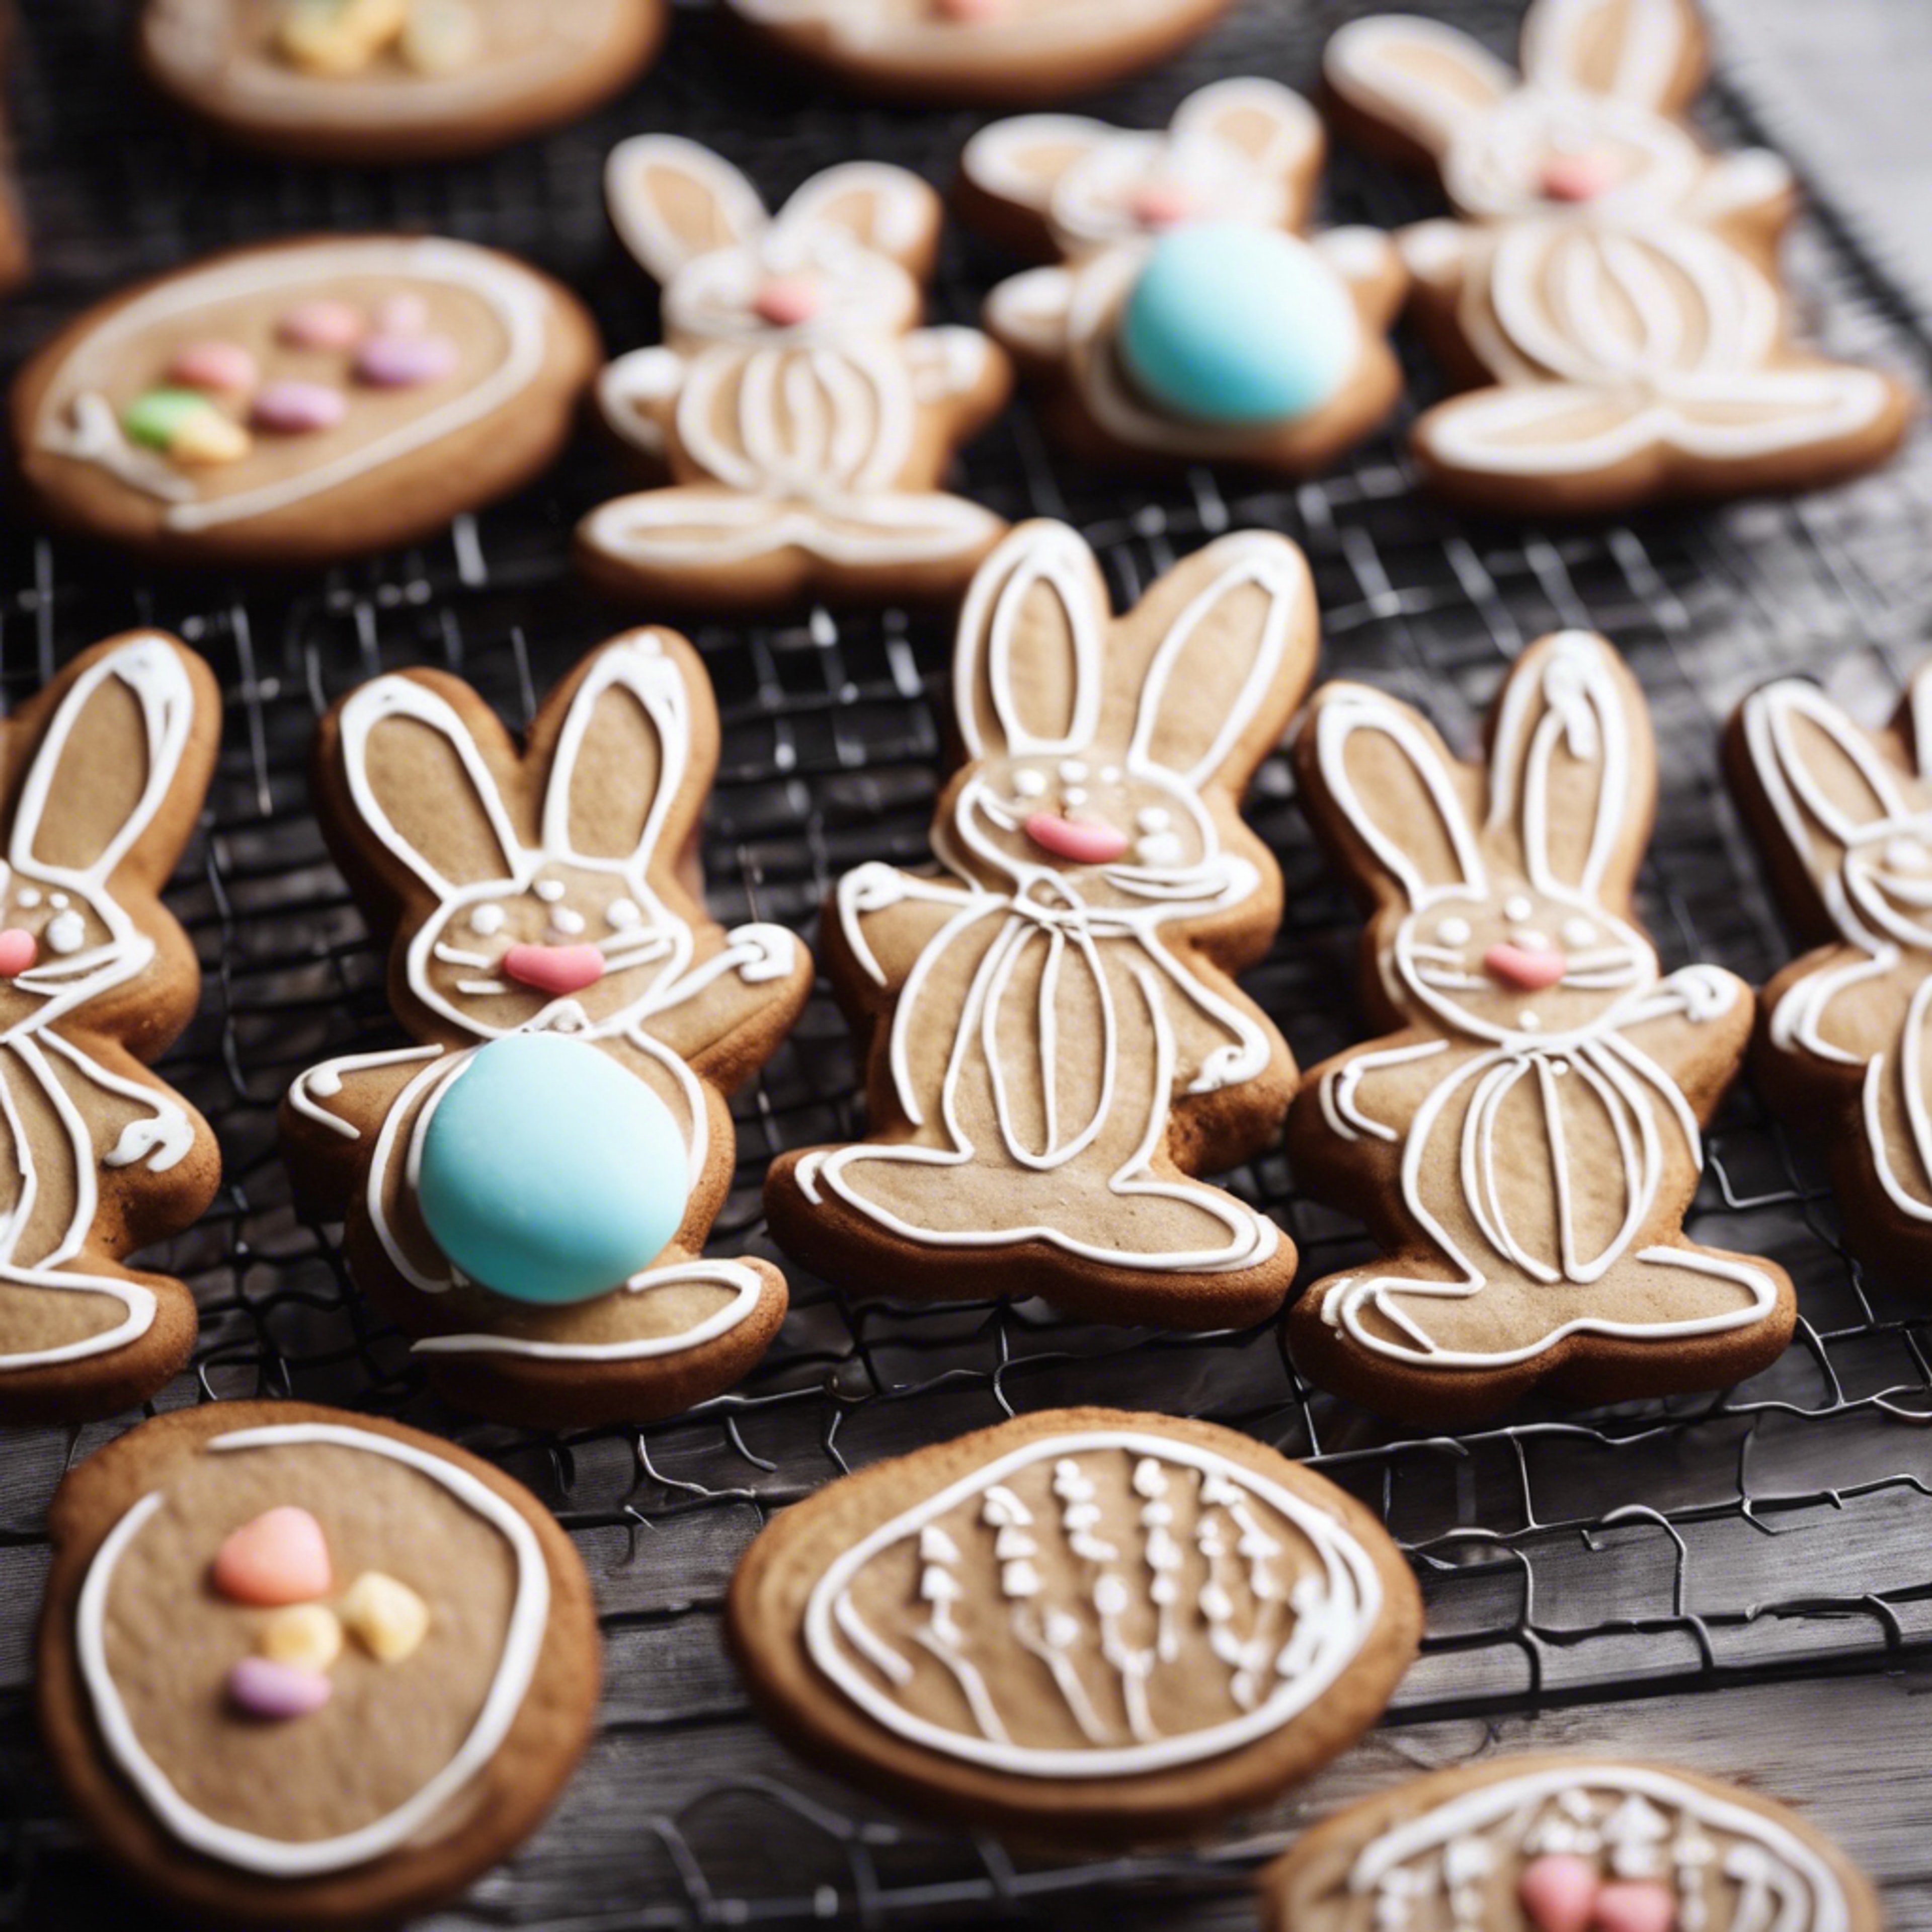 Homemade gingerbread cookies shaped like Easter bunnies and eggs, cooling on a rack. Wallpaper[c62694eb033d400aa62f]